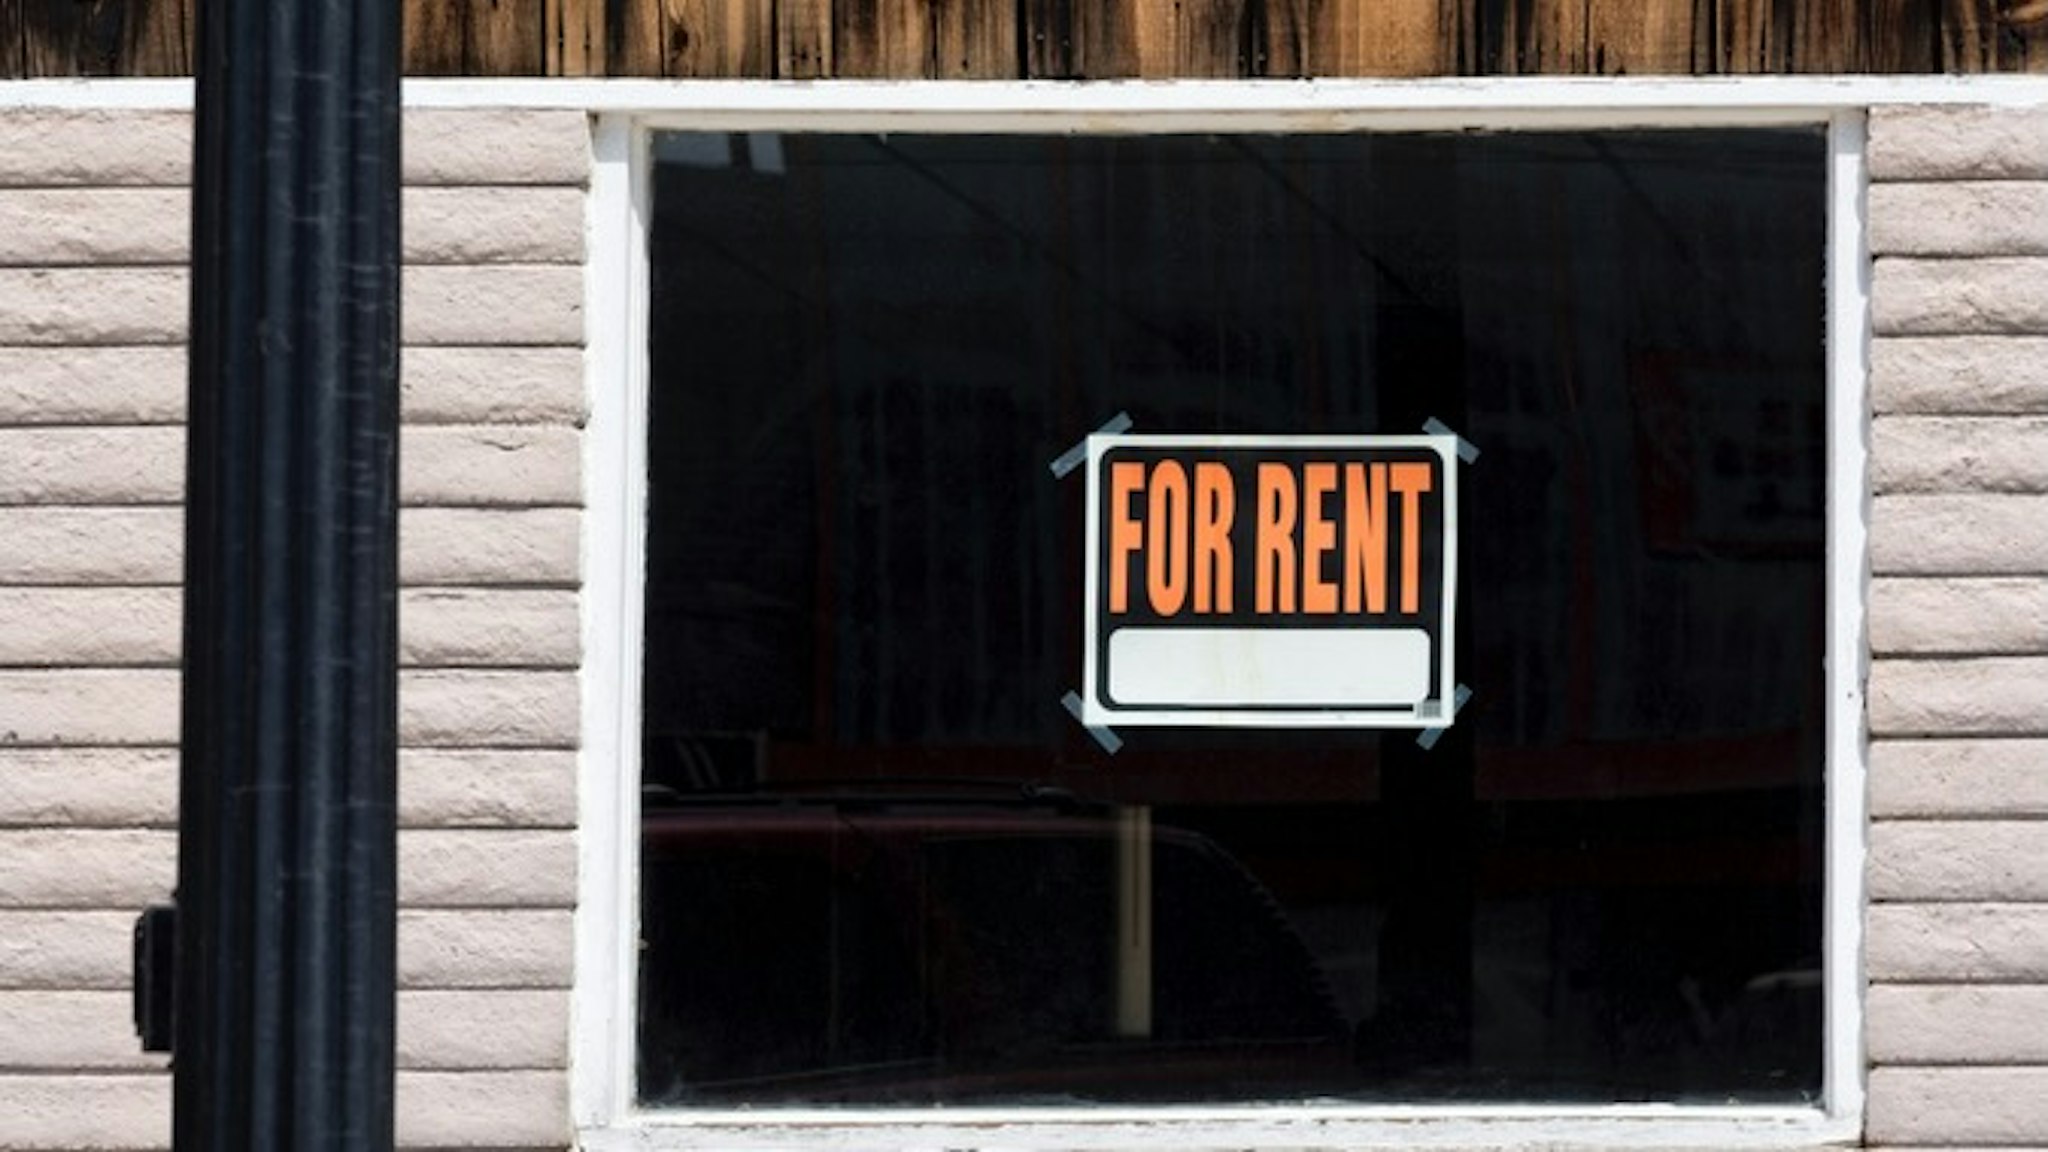 For Rent sign in a window - stock photo Thomas Winz via Getty Images